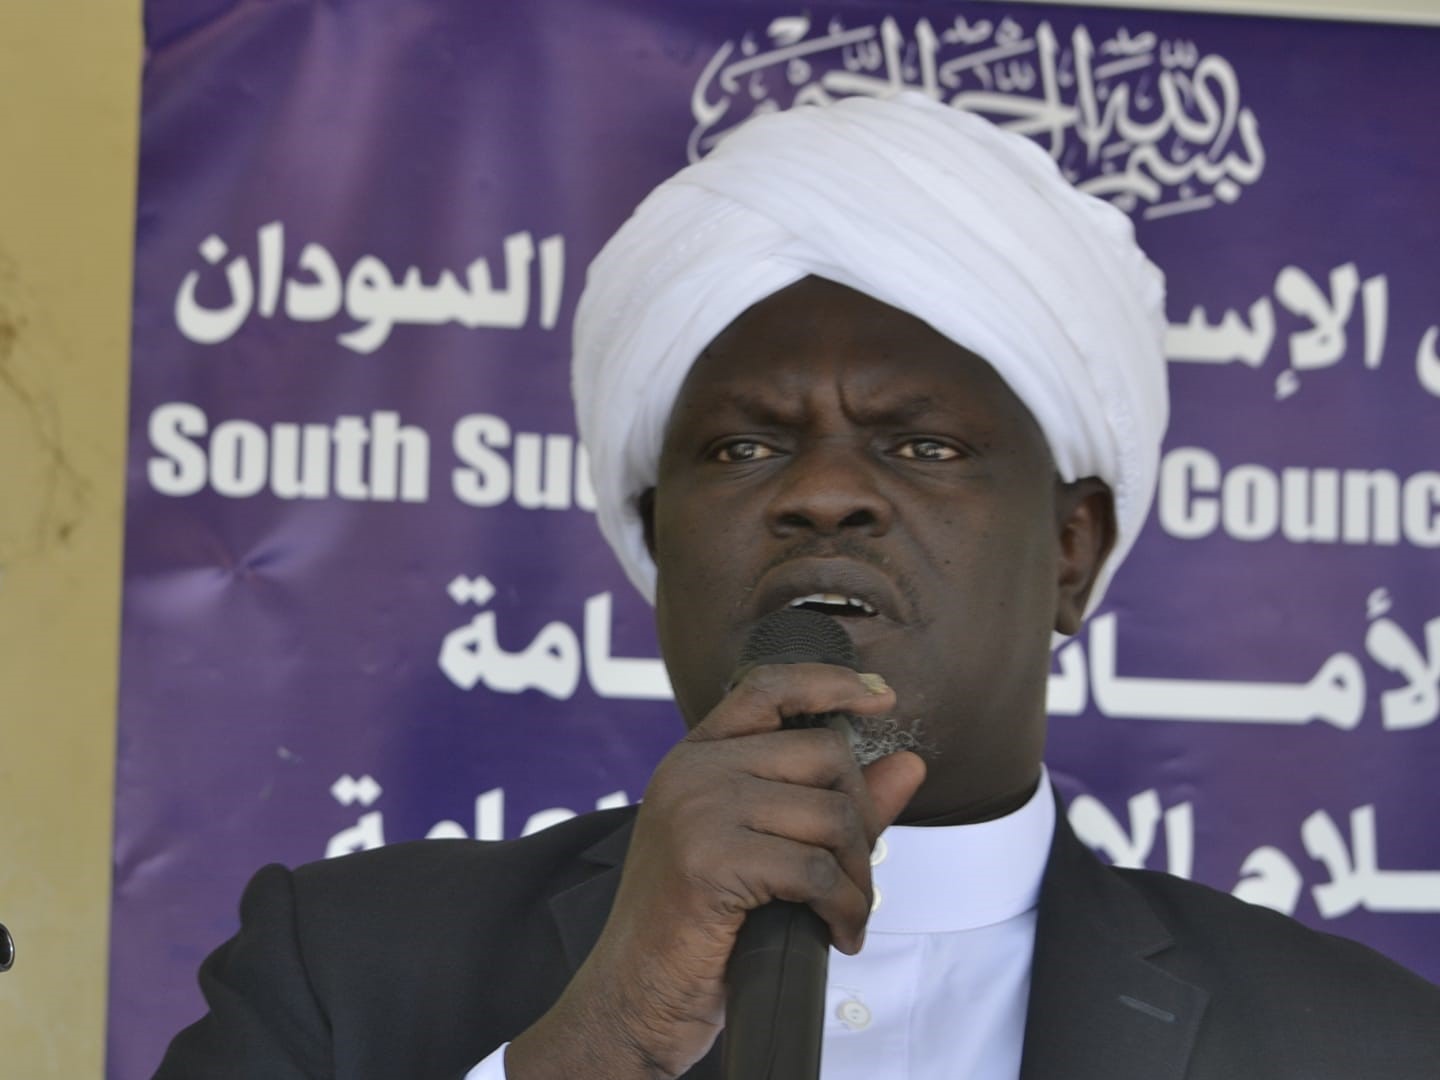 Islamic Council applauds Pope’s peace efforts in South Sudan